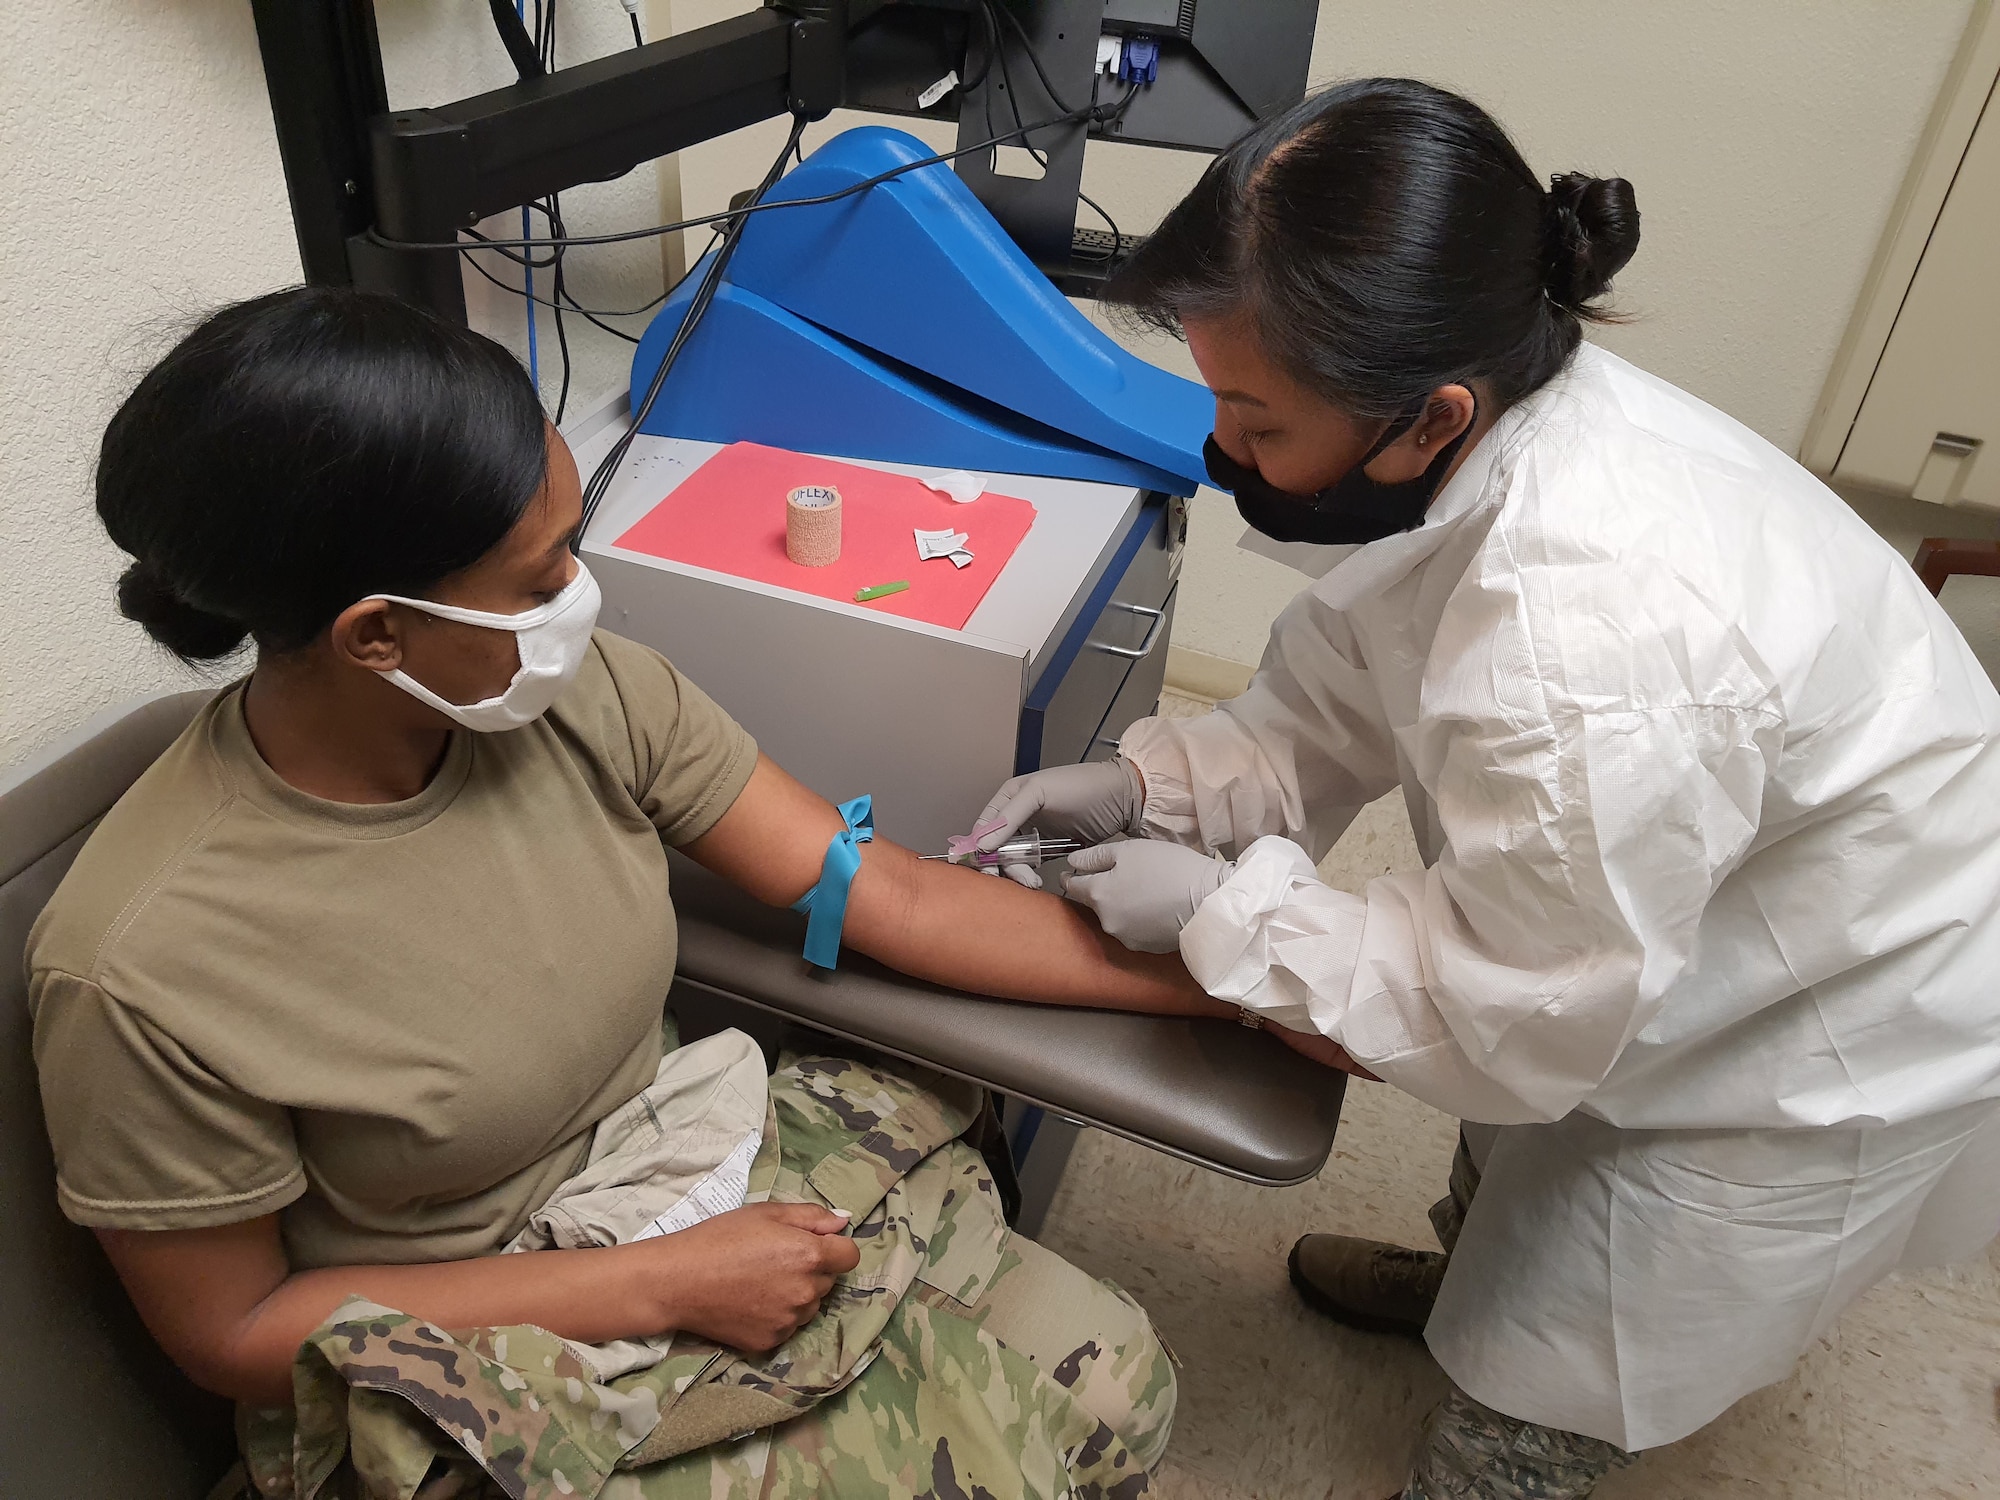 Airman 1st Class Shayla Tillman, 403rd Force Support Squadron personnelist, has blood drawn for routine lab work by Tech. Sgt. Jasmine Wong, 403rd Aeromedical Staging Squadron lab technician, Feb. 6, 2021. The 403rd ASTS is responsible for ensuring that the Reserve Citizen Airmen of the 403rd Wing are current or 'green' on their Individual Medical Readiness status; which includes providing immunizations, optometry services, dental x-rays and exams, lab draws, audiograms, and physicals. (U.S. Air Force photo by Master Sgt. Jessica Kendziorek/ photo permission granted by Airman 1st Class Shayla Tillman)